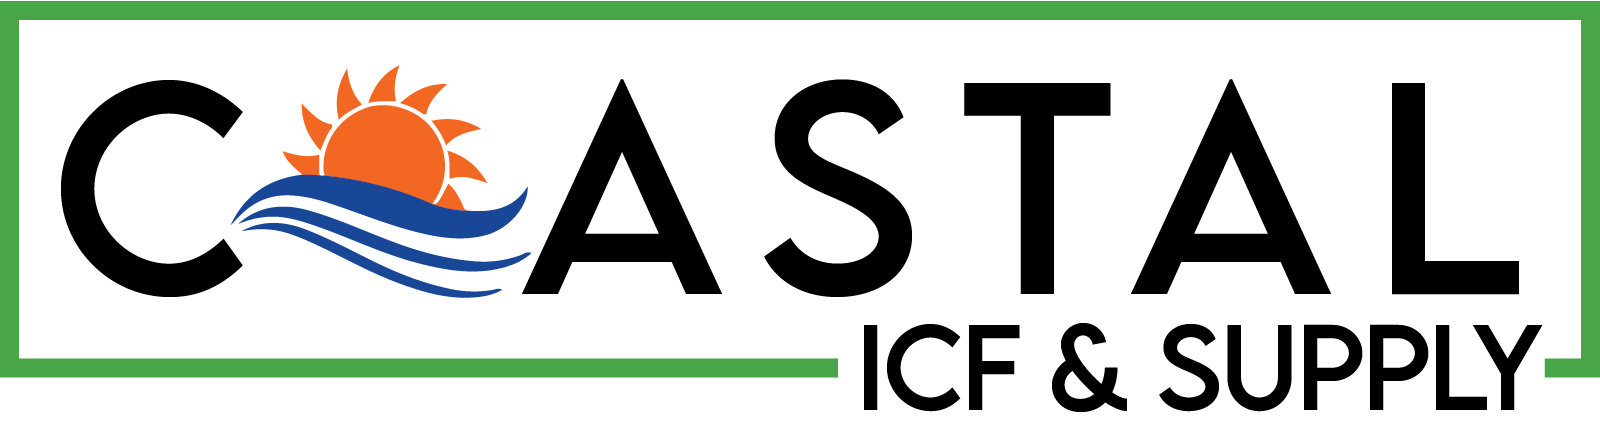 ICF logo - Centre for Wood Science & Technology